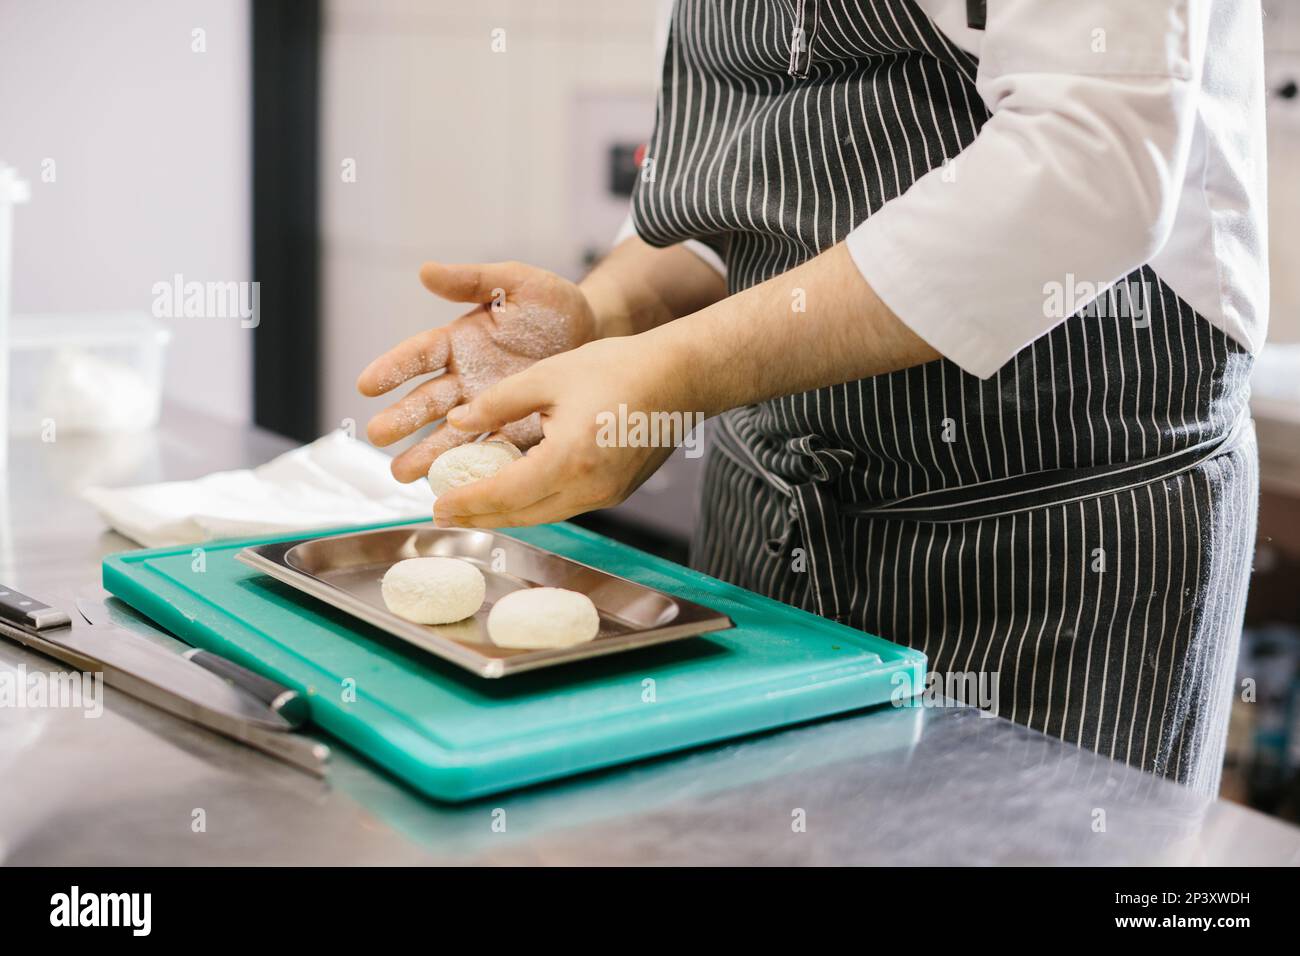 The chef prepares cheese pancakes in the kitchen of the cafe. Stock Photo